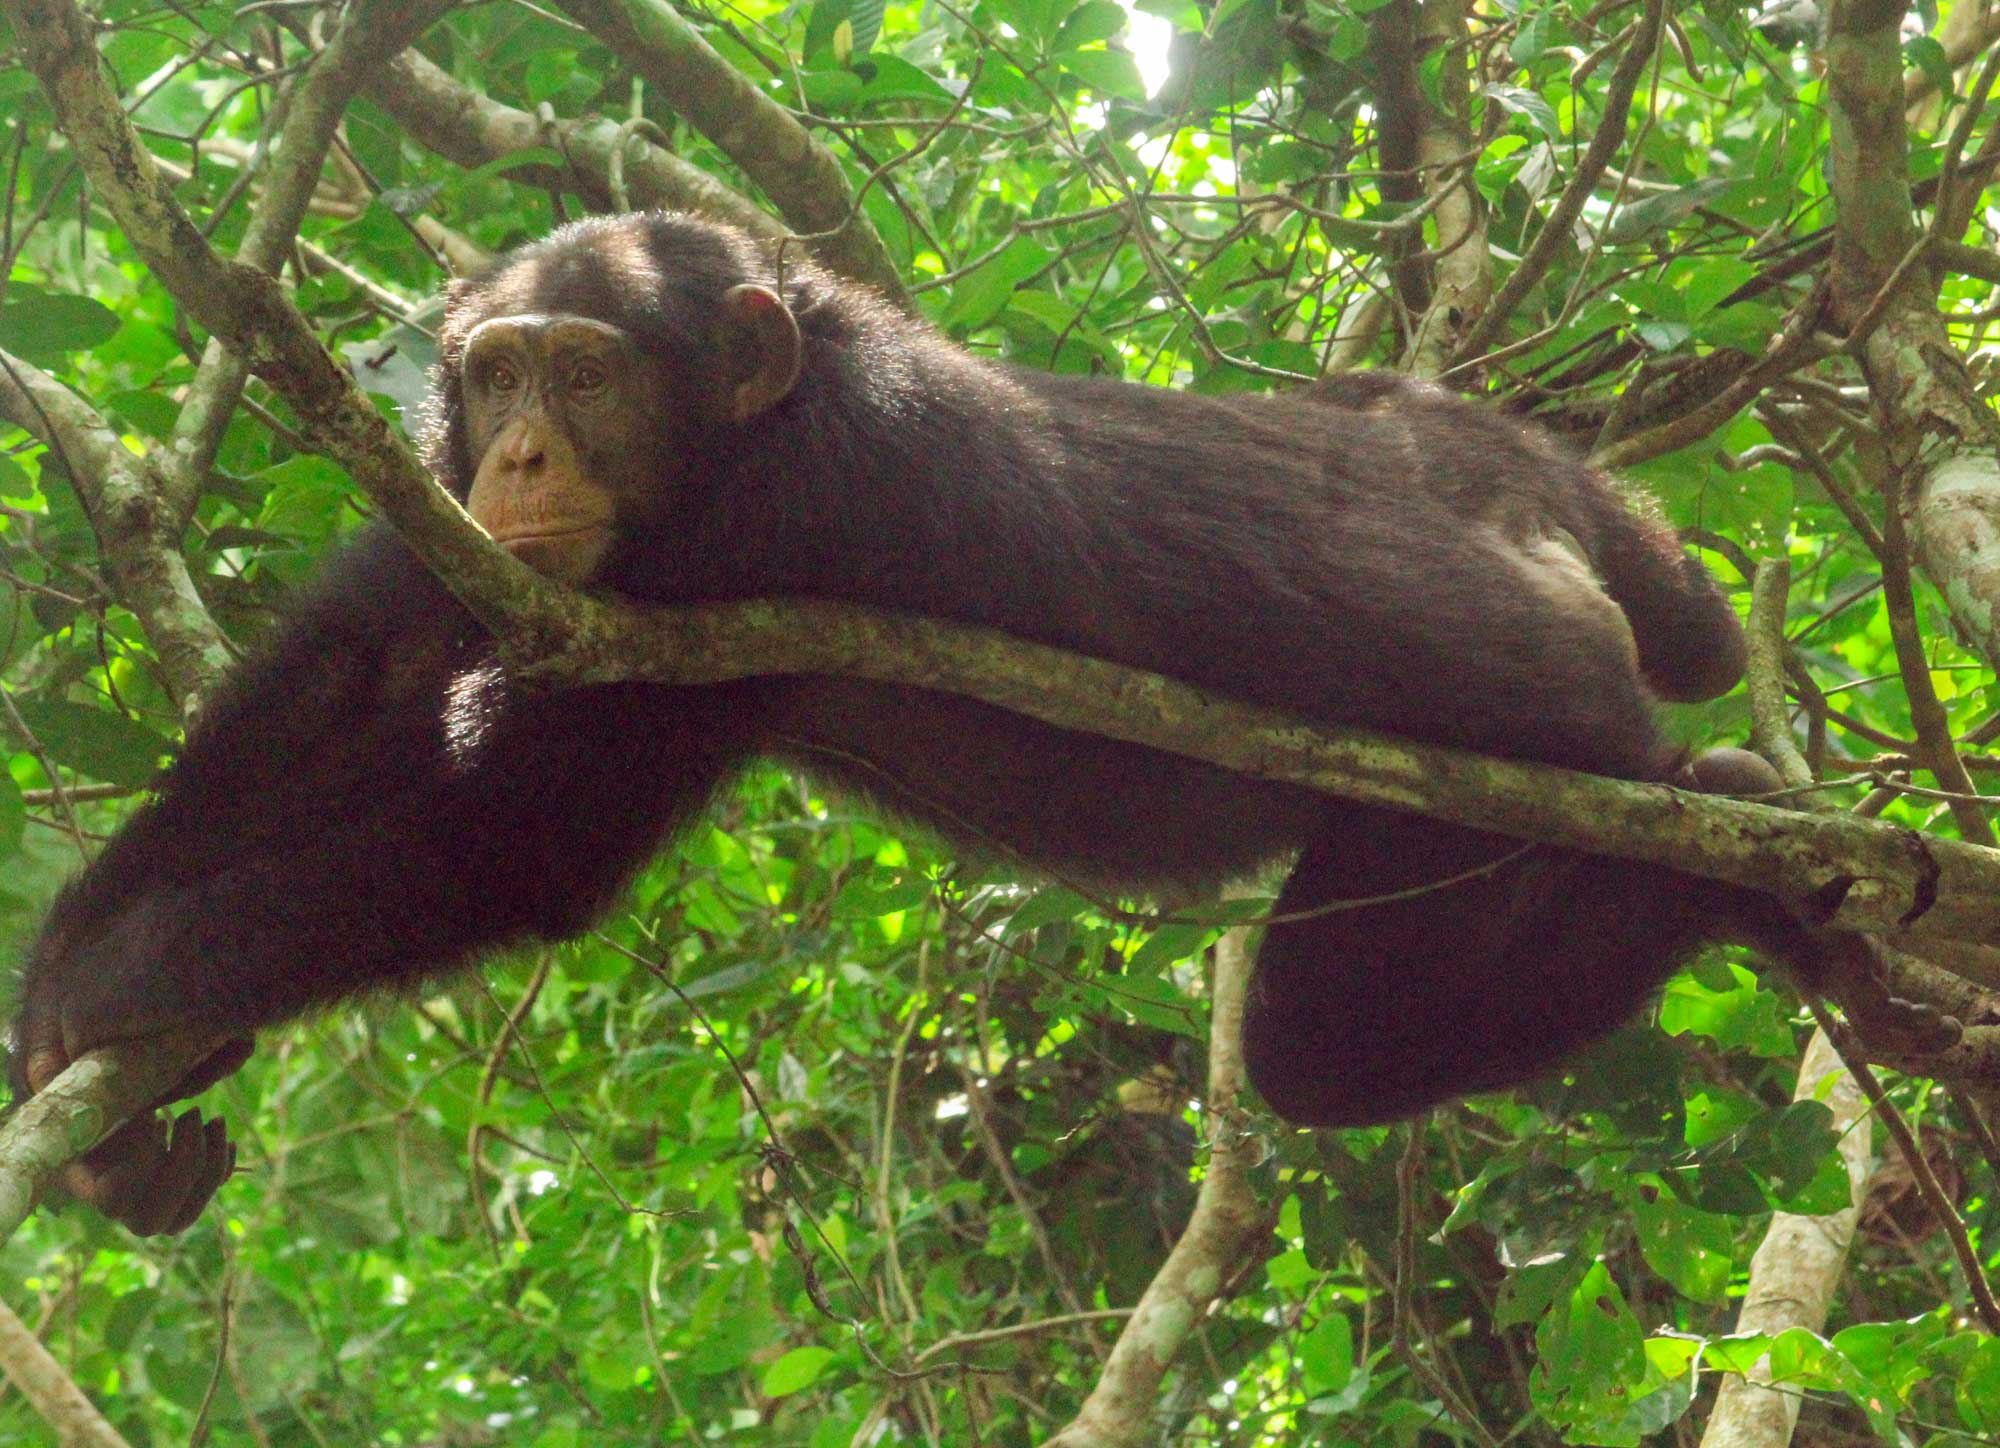 Photograph of a chimpanzee lounging in a tree in Guinea. The chimp is laying on a thin tree branch with its arms outstretched and its hands draped over another branch. 